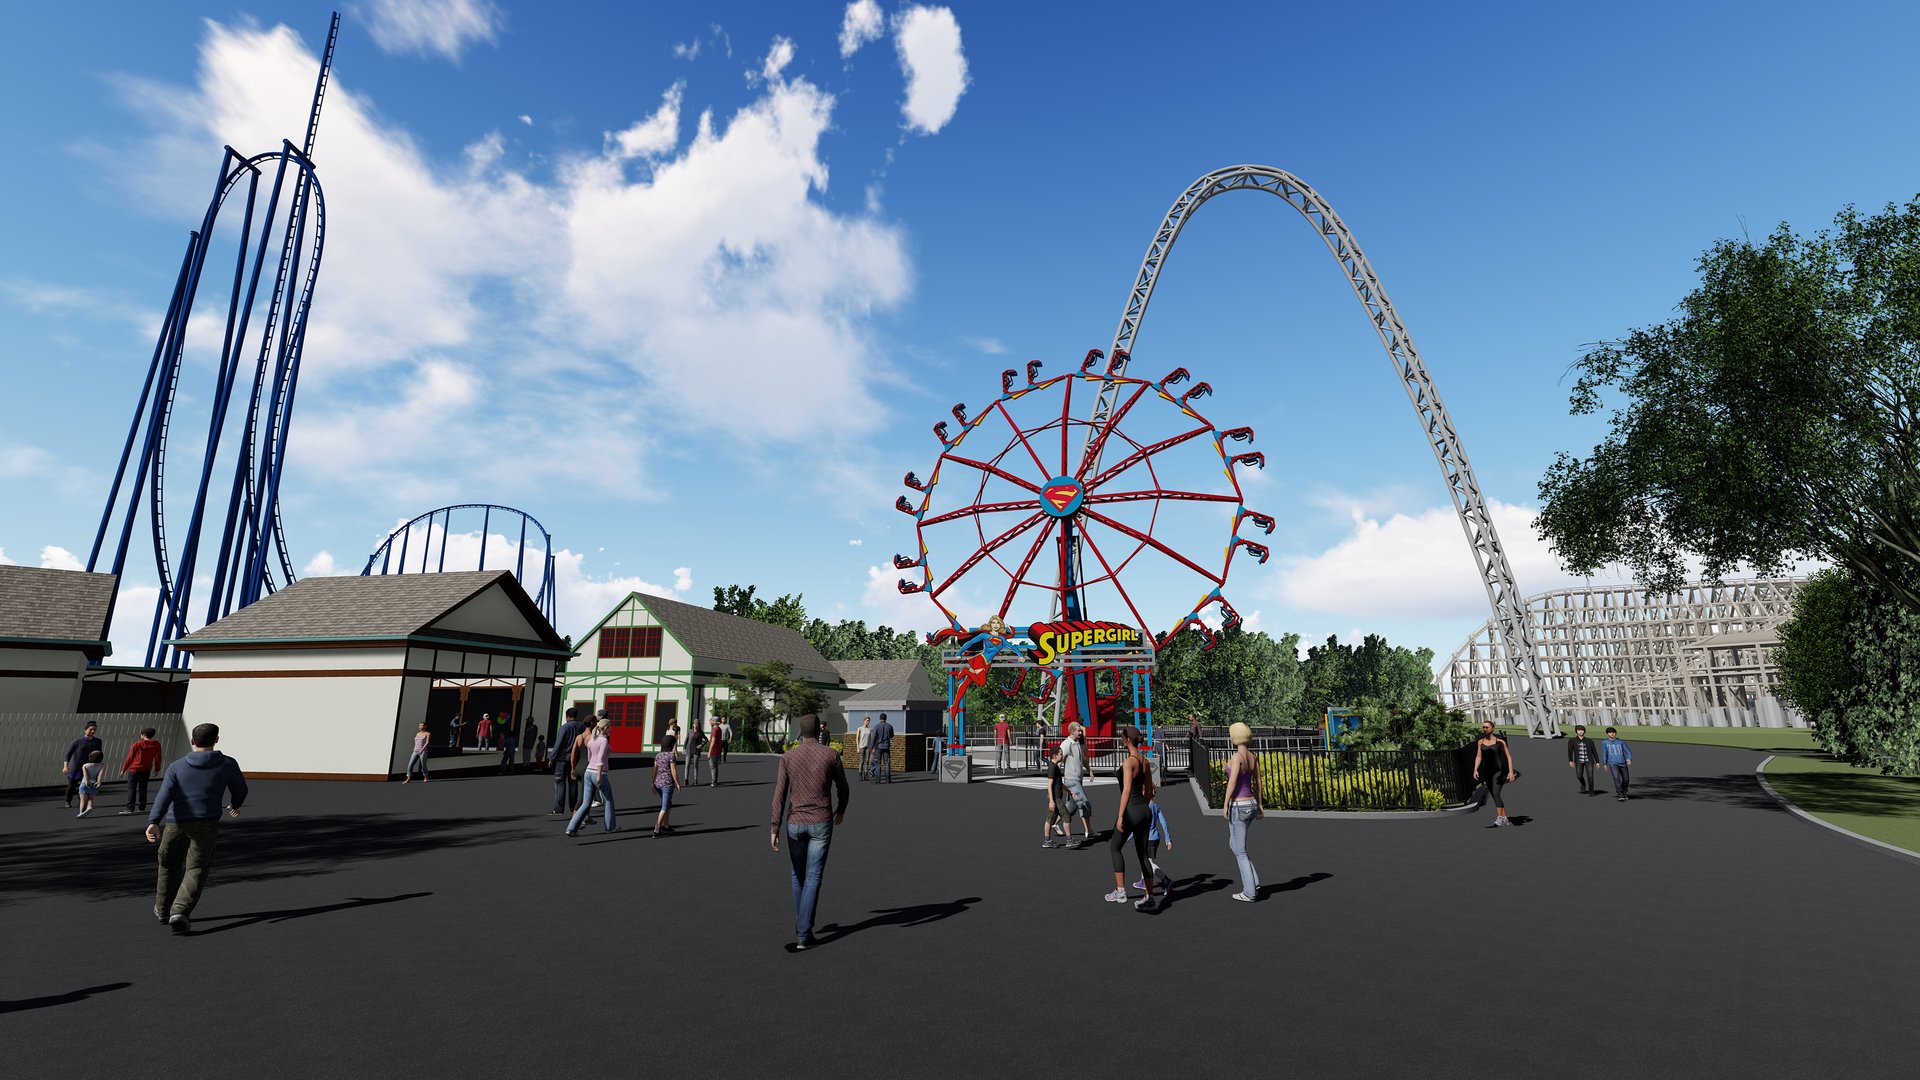 High Speed Giant Thrill Wheel Coming to Six Flags St. Louis in 2019 | Six Flags St Louis